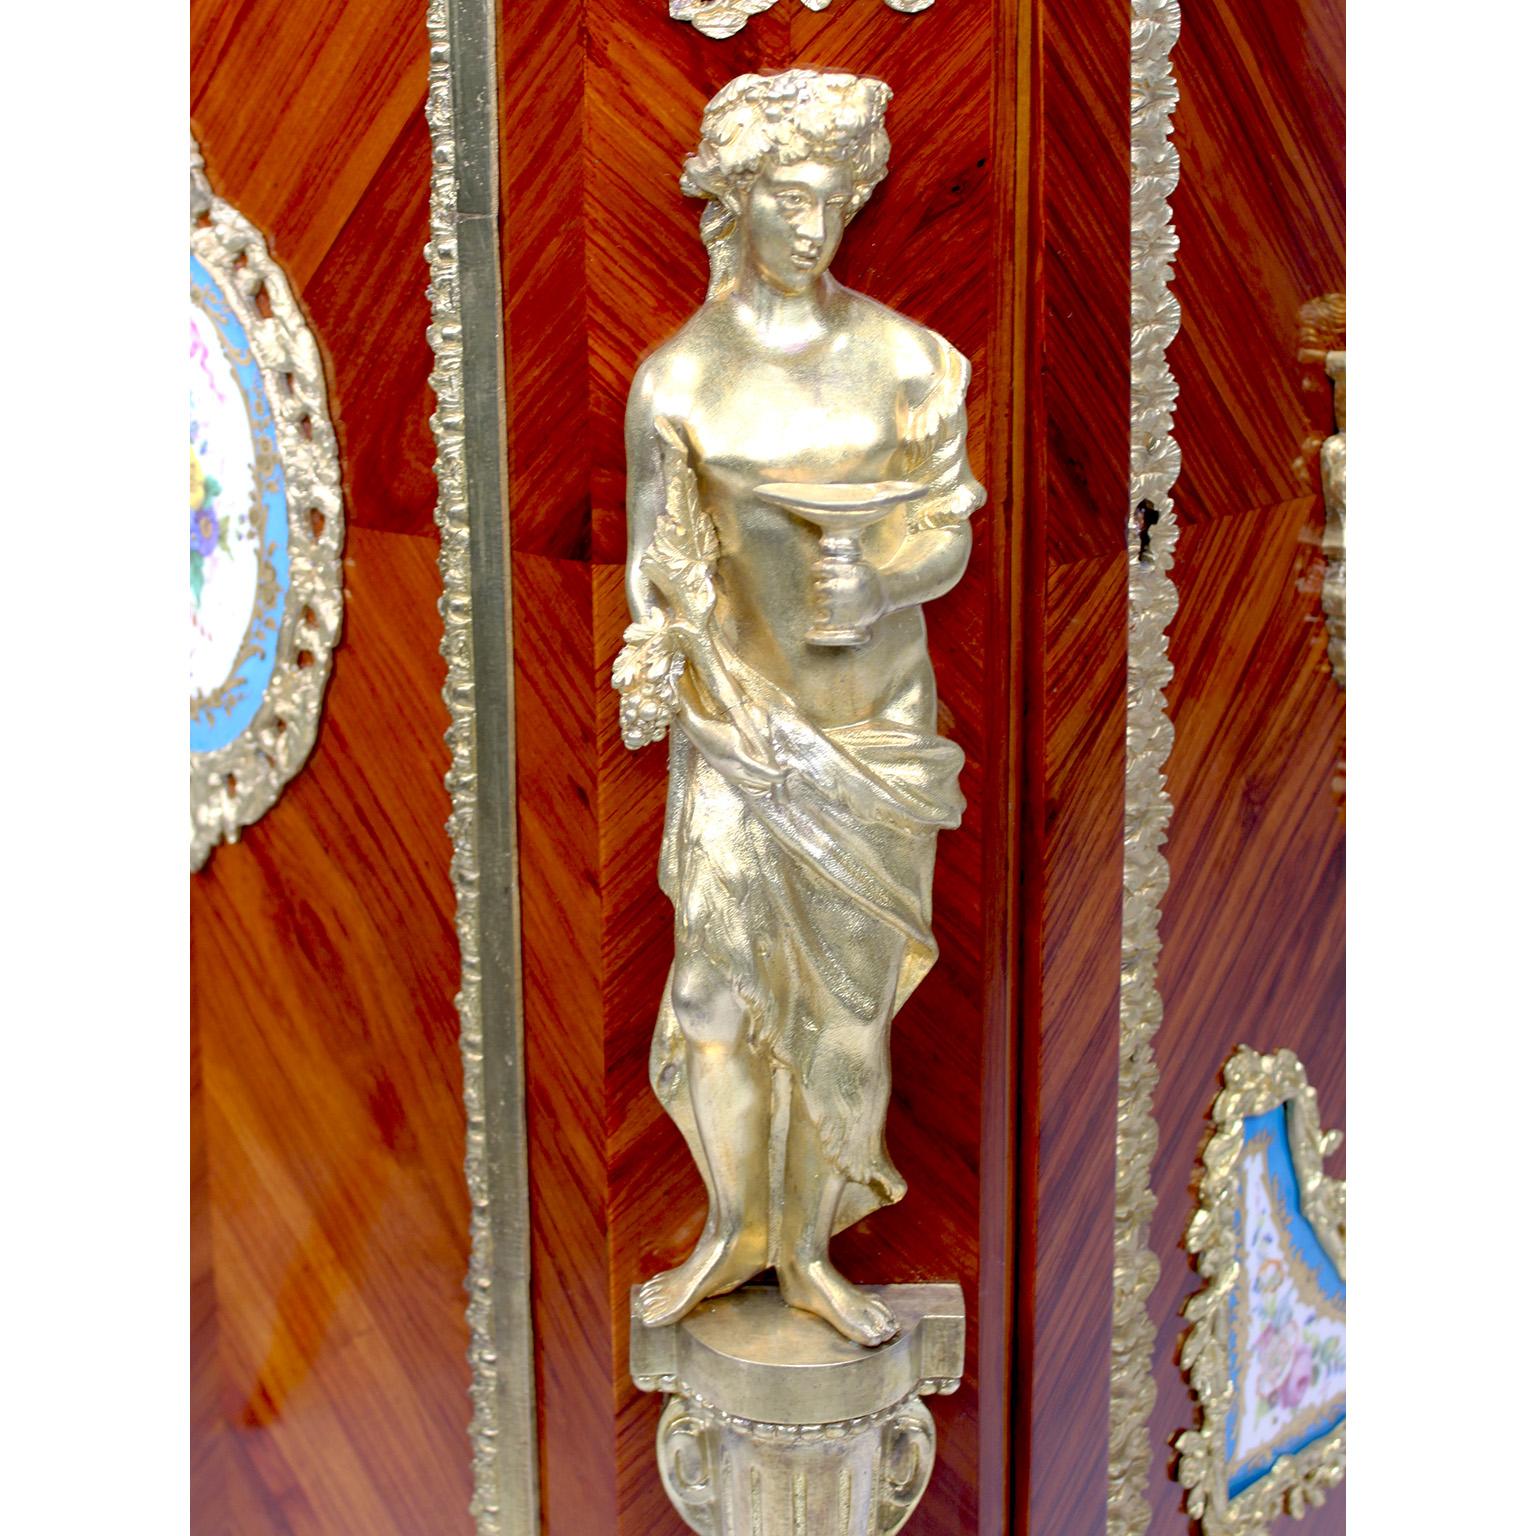 French Napoleon III Ormolu & Porcelain Mounted Cabinet Meuble D'Appui by Befort For Sale 10